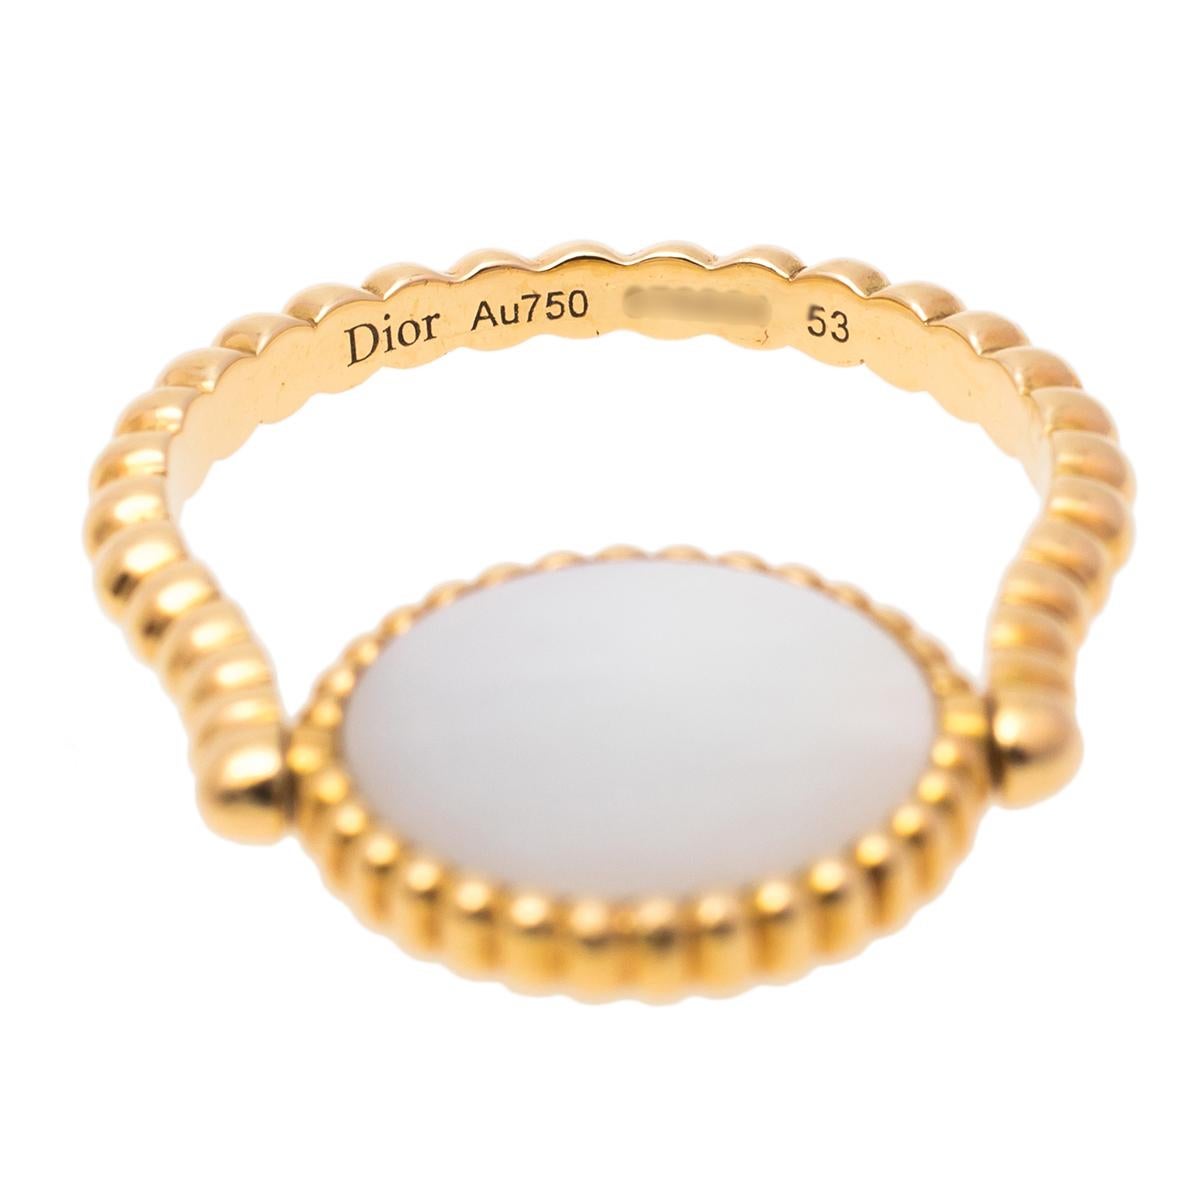 Dior's 'Ros Des Vents' ring is an eye-catching number that is sure to attract a lot of attention. It features an 18k yellow gold beaded band and centered with the signature motif detailed with a star shape topped with a diamond and inlaid with